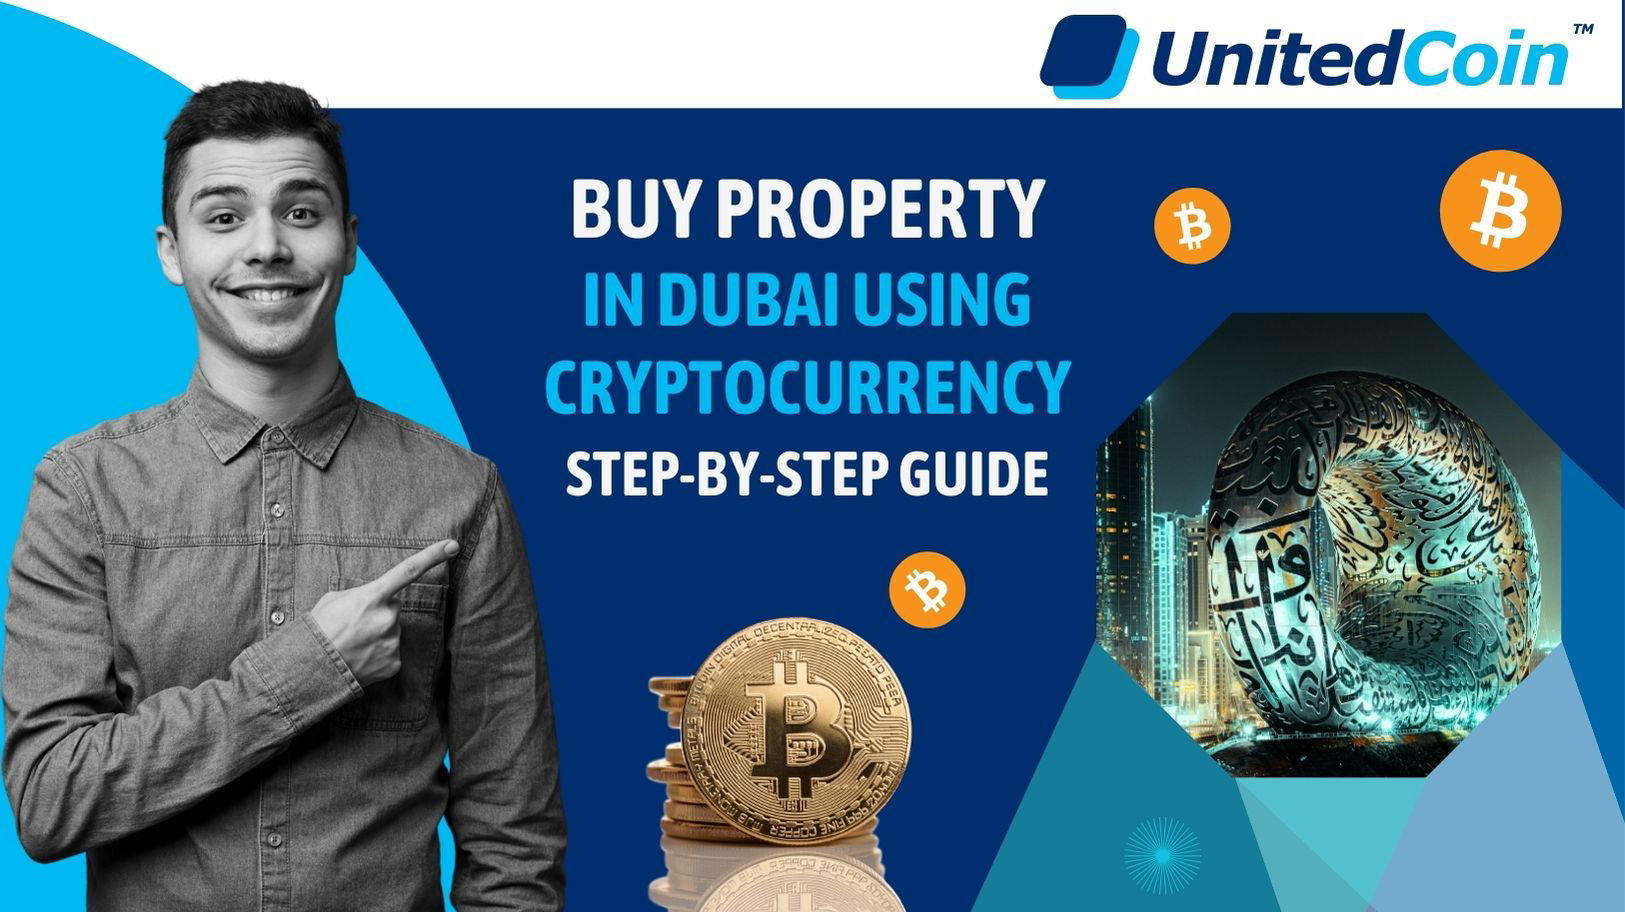 Buy Property in Dubai Using Cryptocurrency: Step-by-step Guide